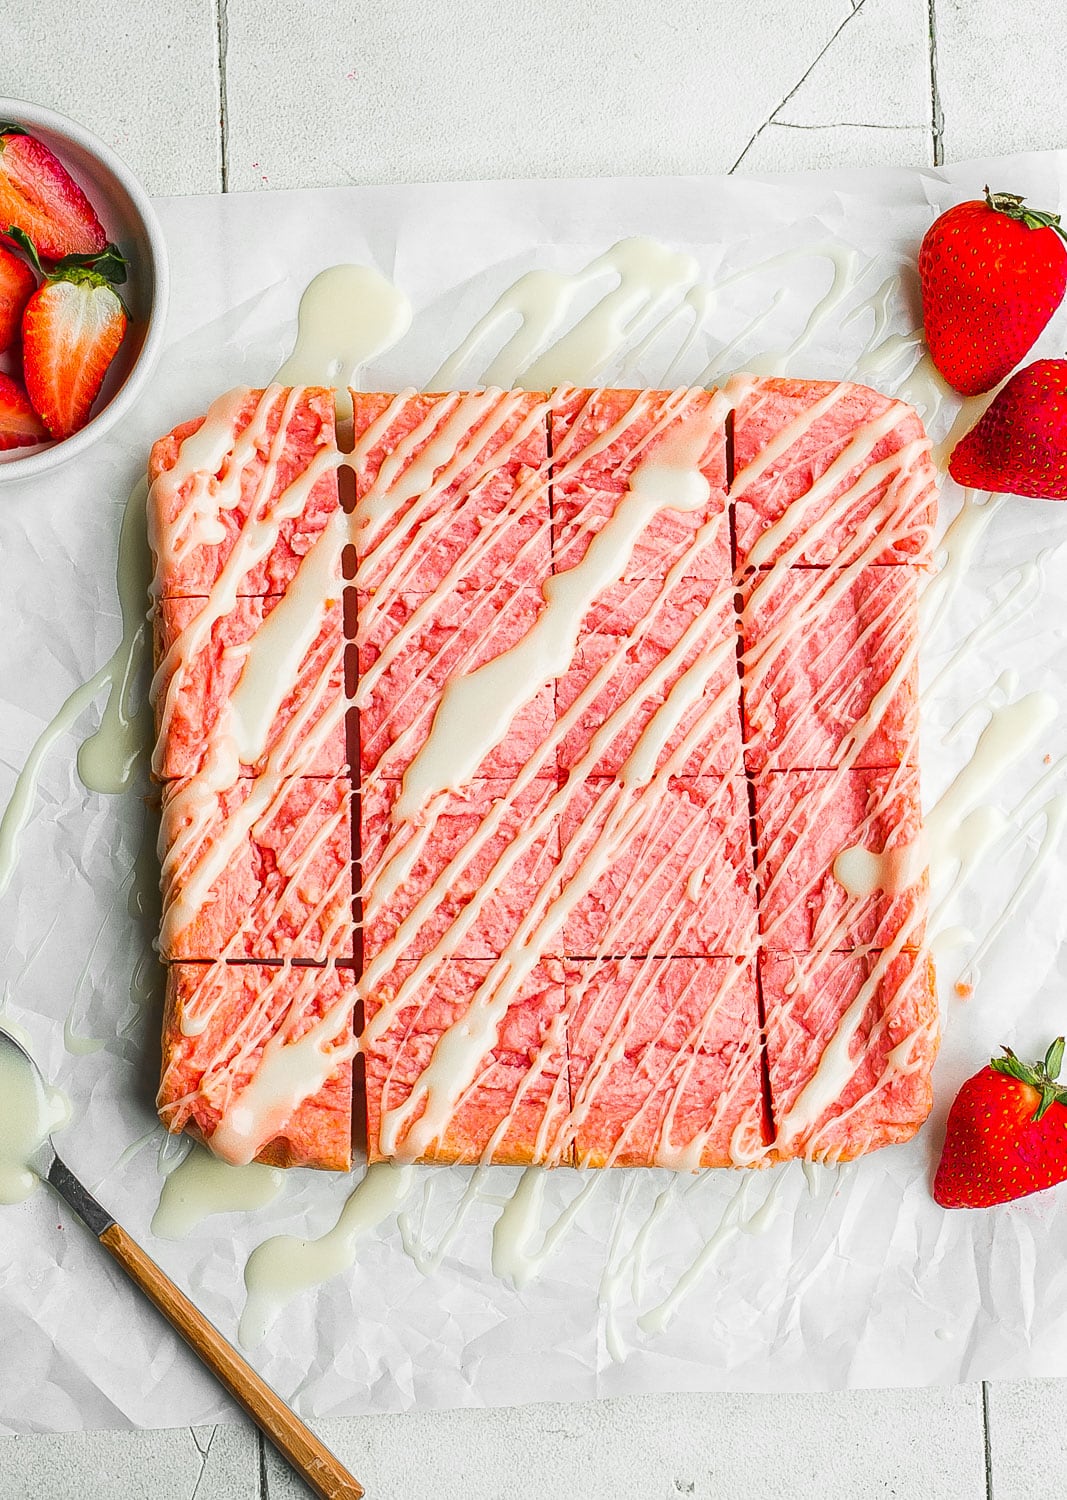 Strawberry brownies cut into squares with icing on top.